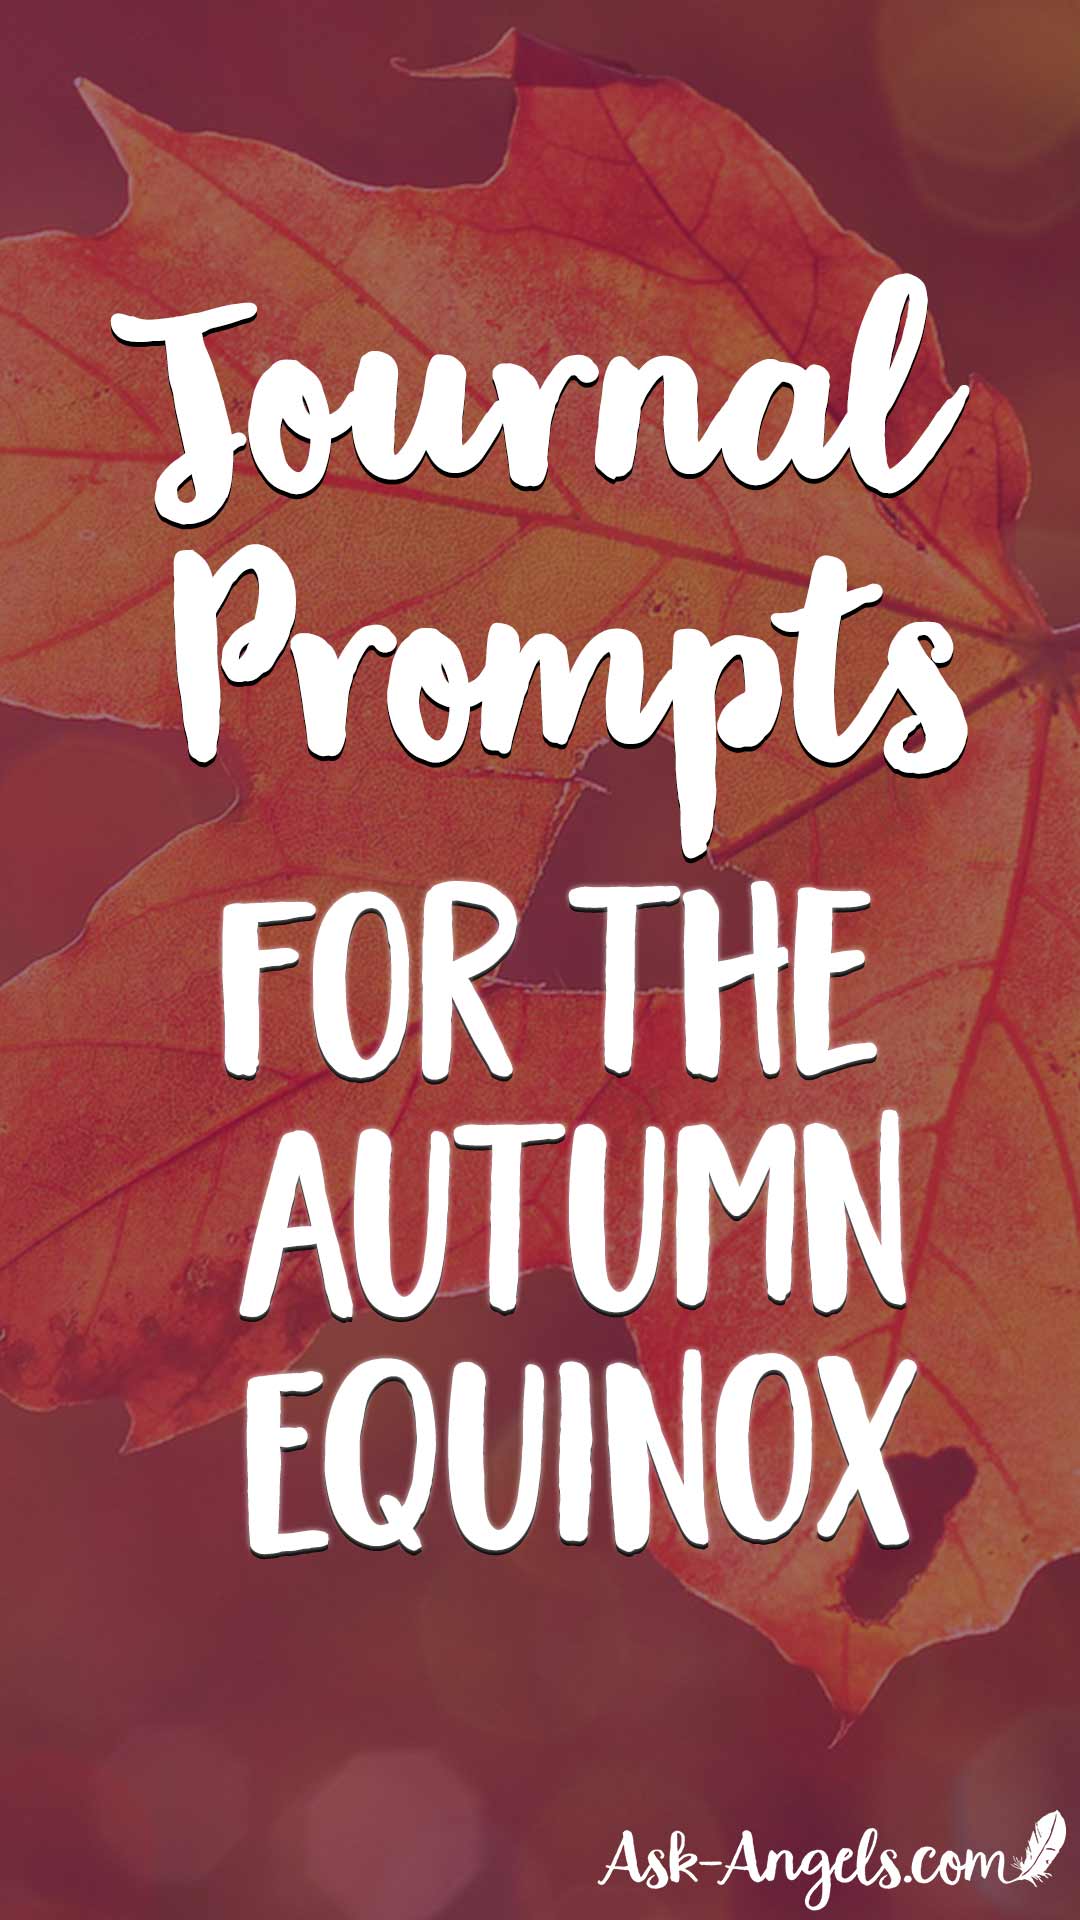 Journal Prompts for the Autumn Equinox